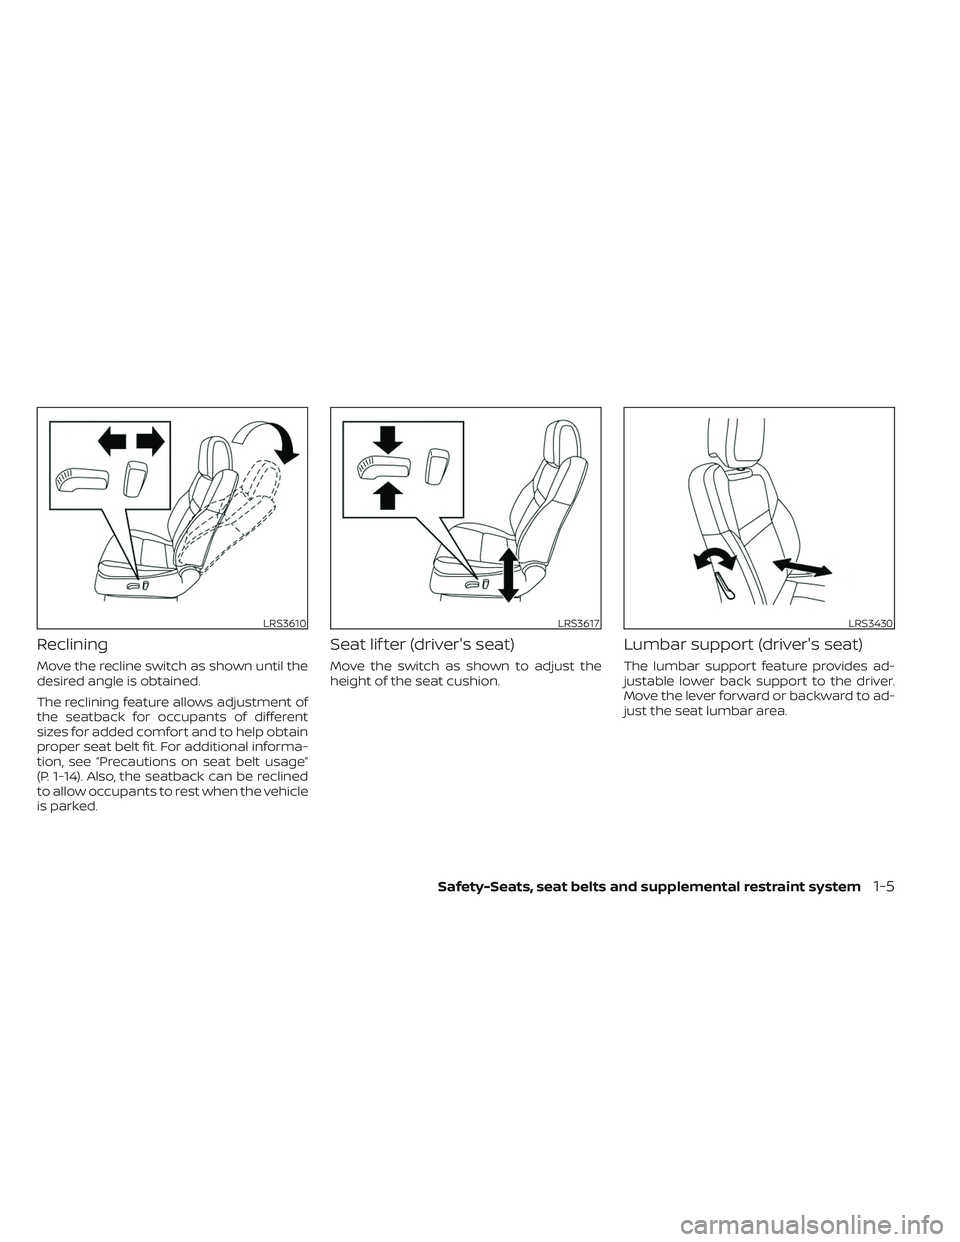 NISSAN FRONTIER 2023 Owners Manual Reclining
Move the recline switch as shown until the
desired angle is obtained.
The reclining feature allows adjustment of
the seatback for occupants of different
sizes for added comfort and to help o